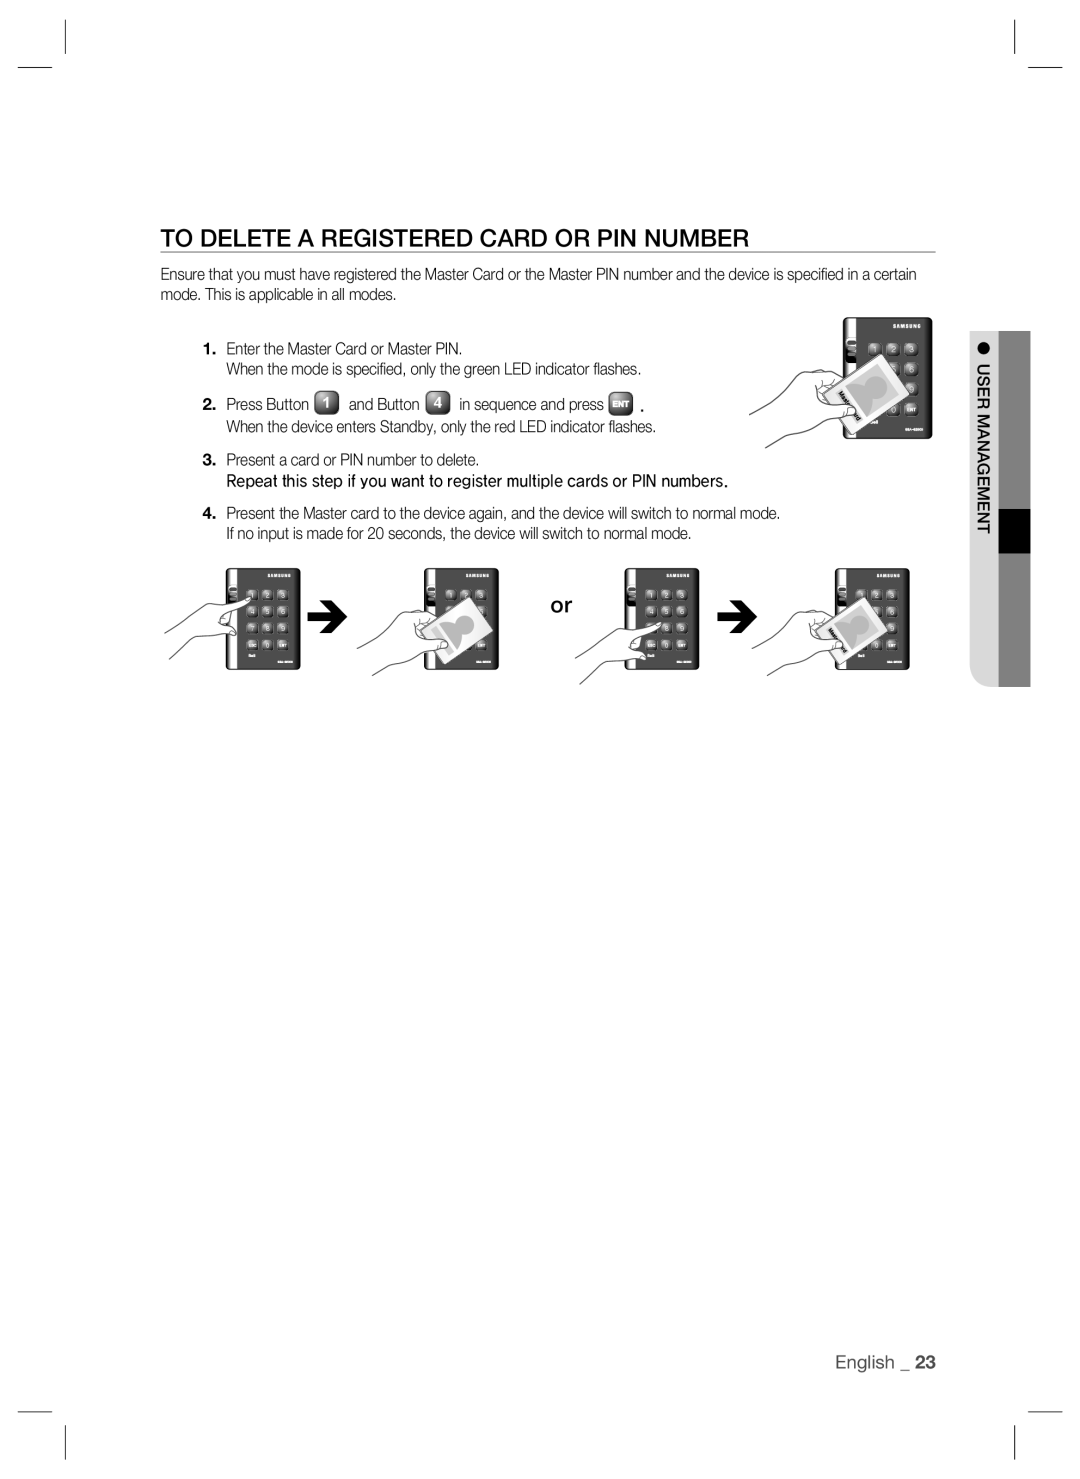 Samsung SSA-S2000W user manual To Delete A Registered Card Or Pin Number, English _ 